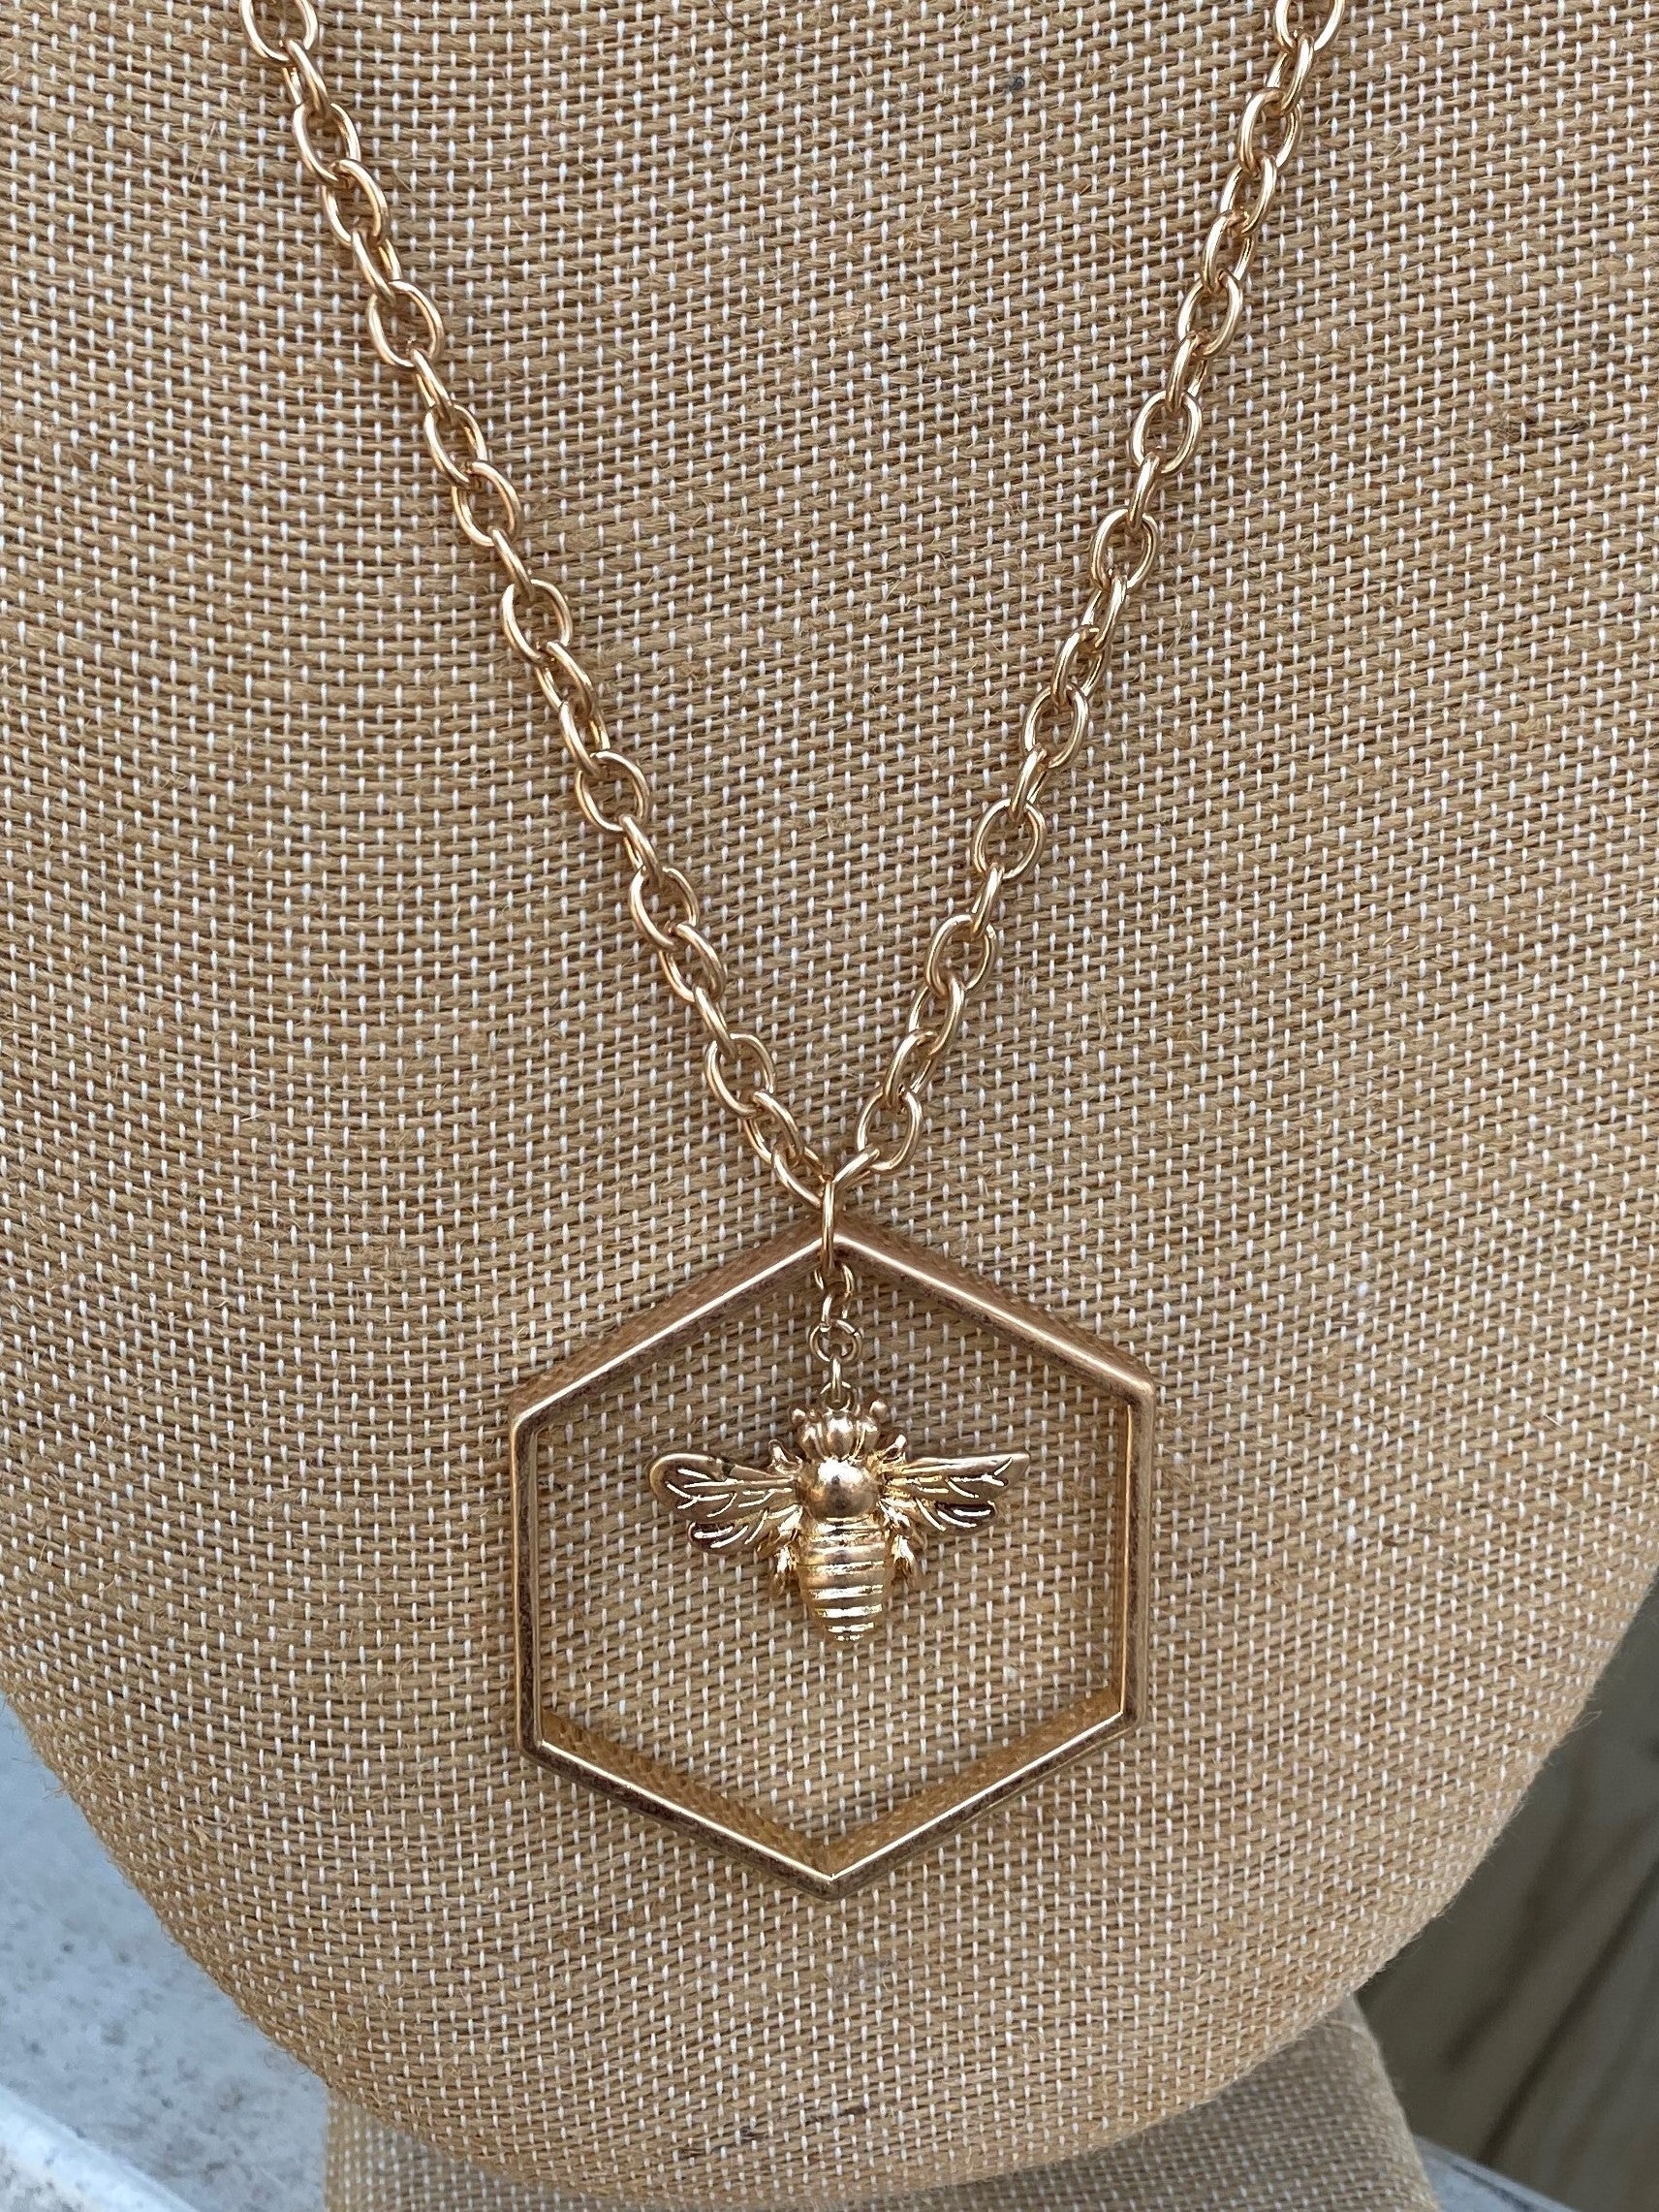 This luxurious necklace features a glossy queen bee drop nestled inside a hexagon and hung on a long gold chain, perfect for any elegant look. With an adjustable length of 30-33", you can show off your inner beehive queen all day long.